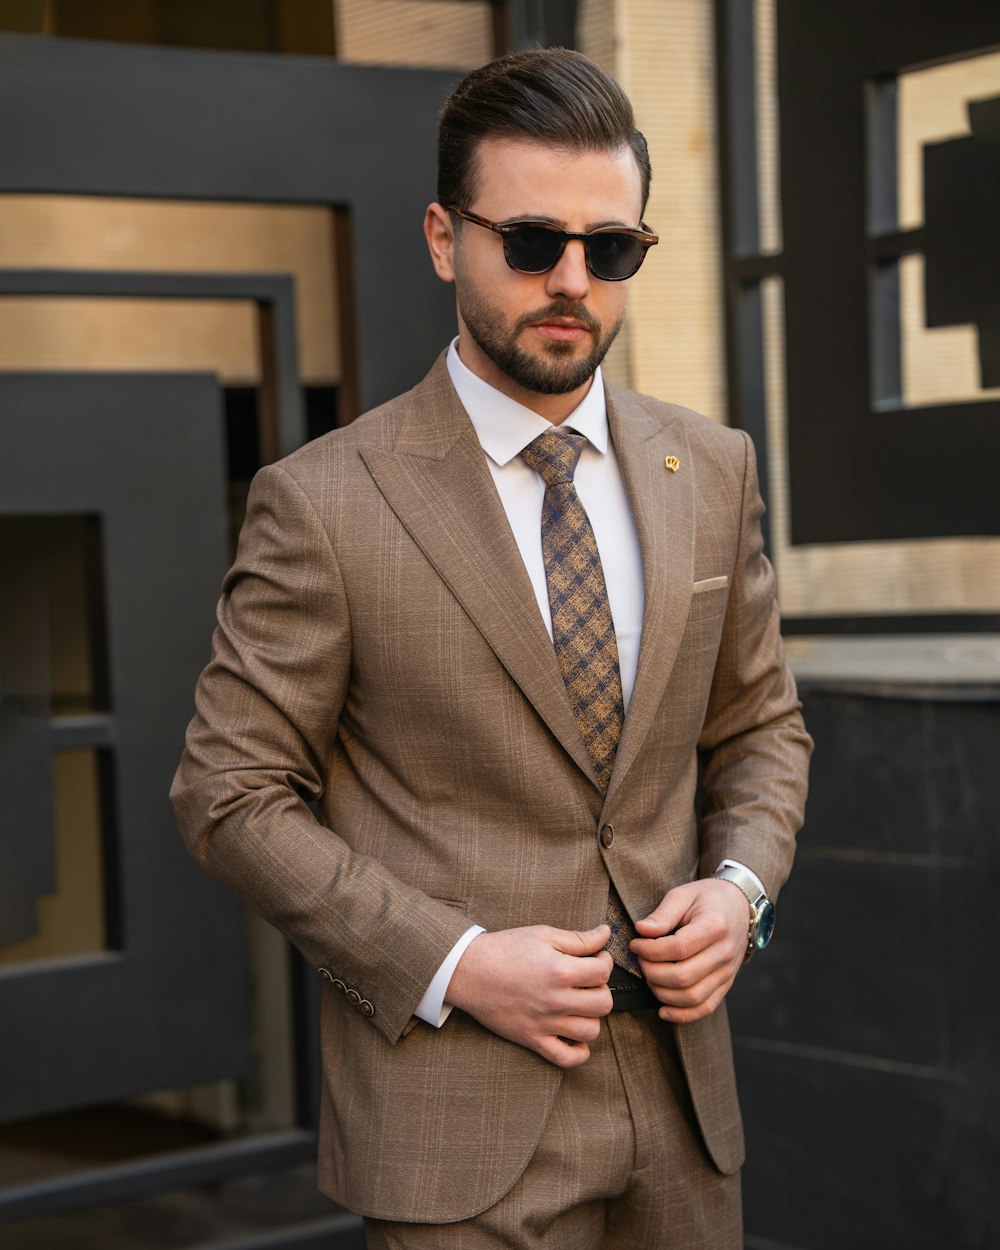 a man in a suit and sunglasses standing in front of a building